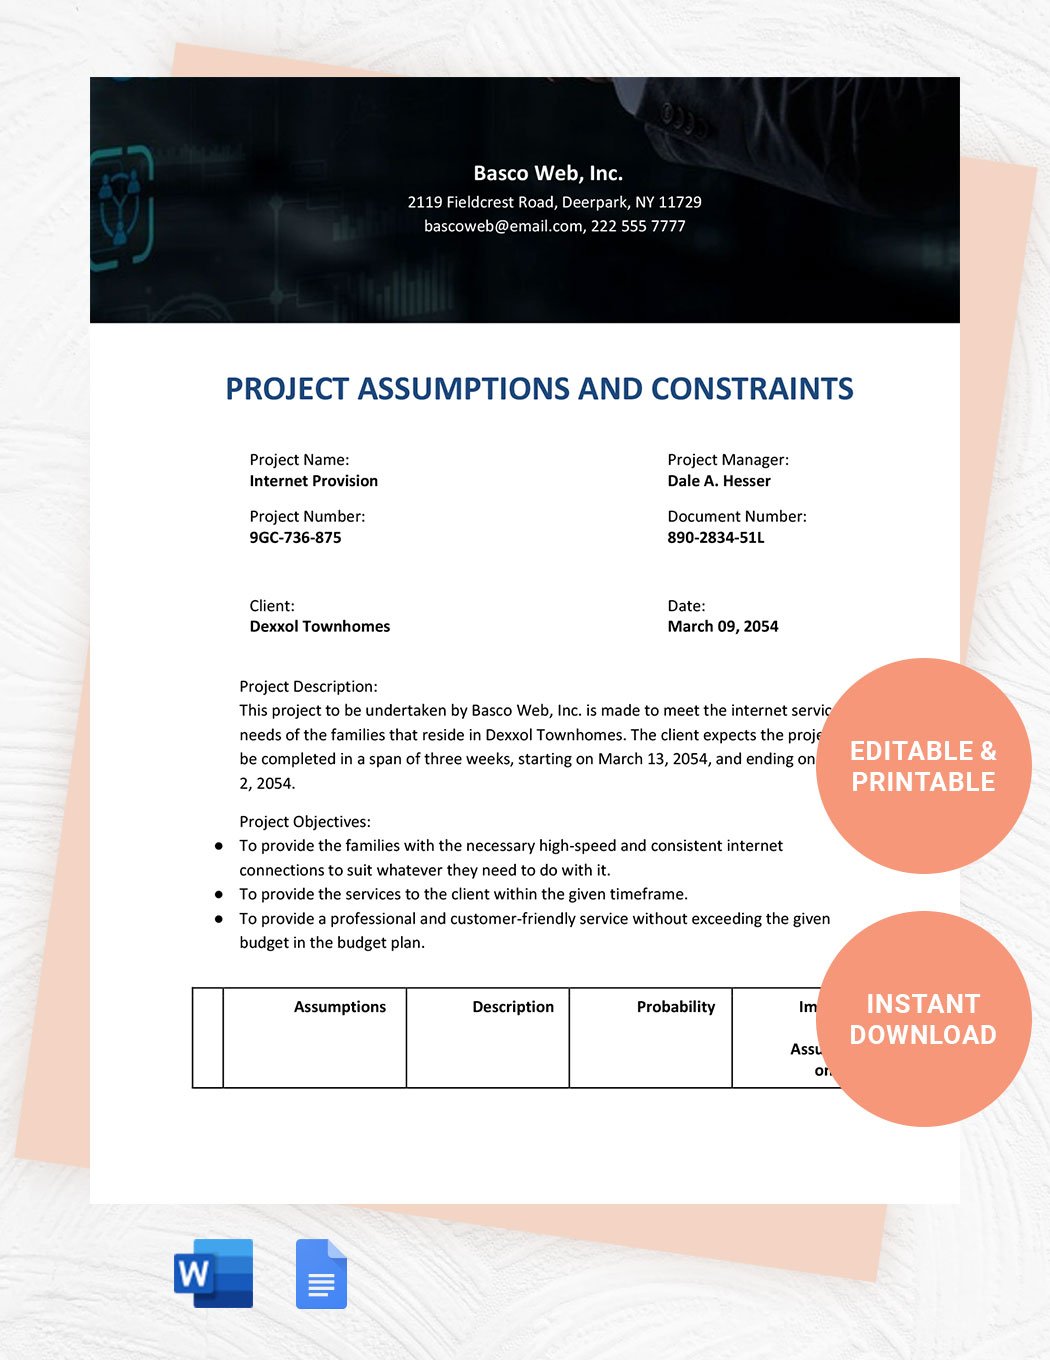 Project Assumptions And Constraints Template in Word, Google Docs